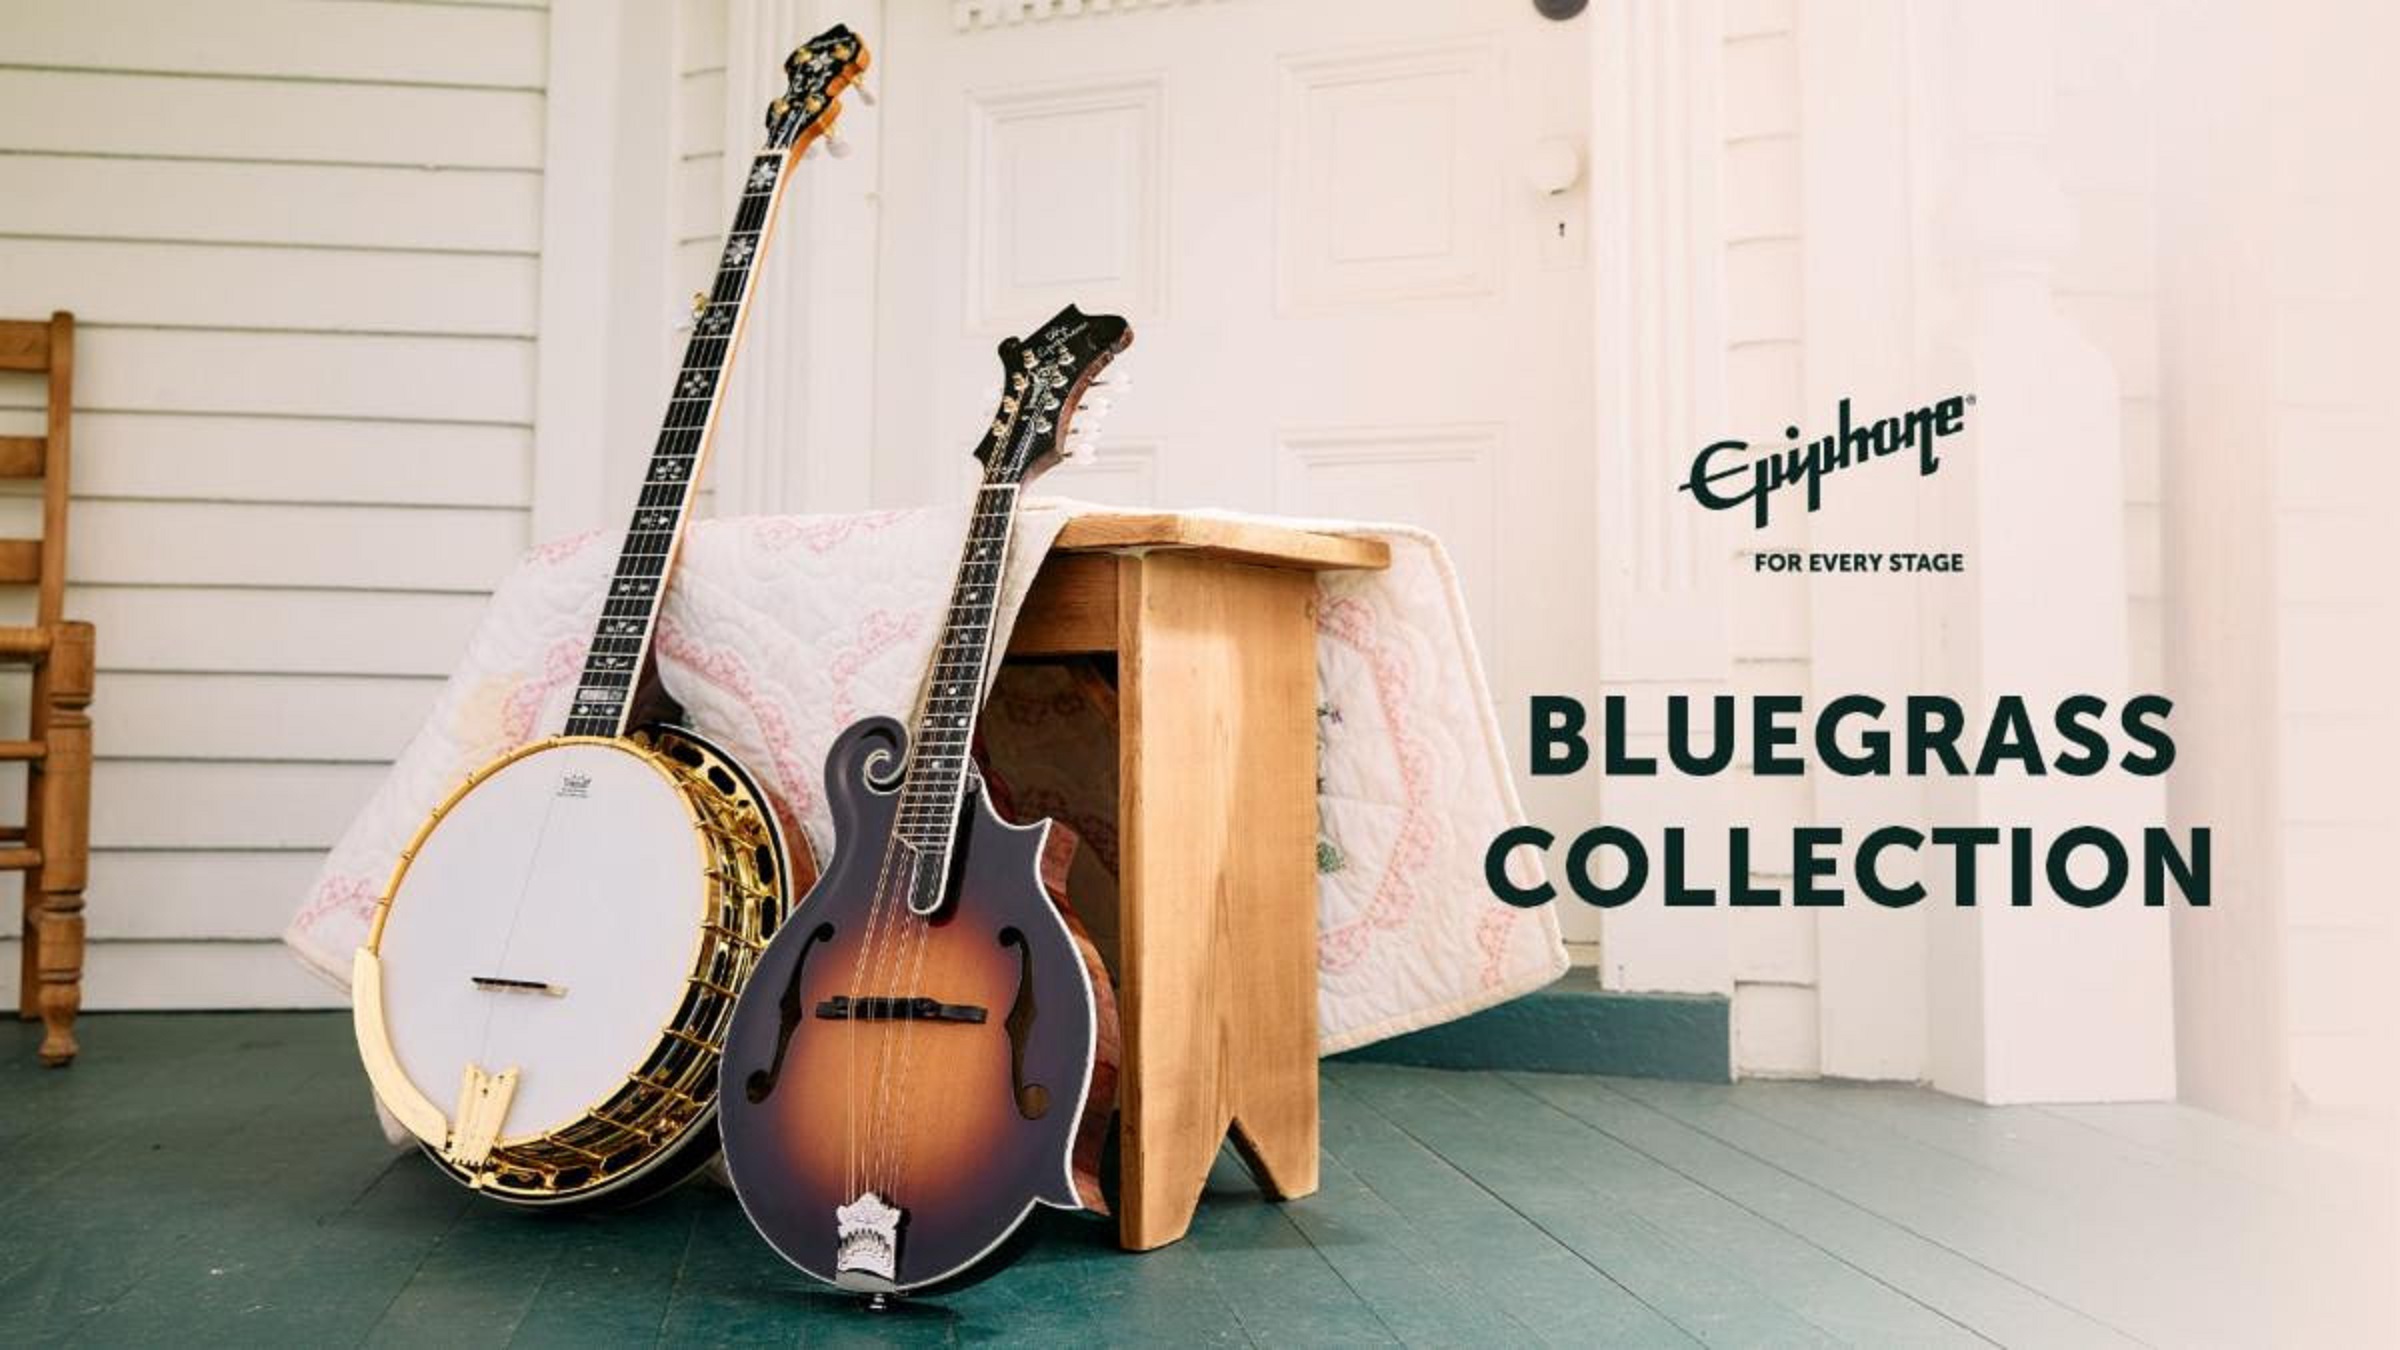 Epiphone Bluegrass Collection Announces the Earl Scruggs Golden Deluxe Banjo, Mastertone Bowtie and Classic Banjos, and the F-5G, Mandobird, and the F-5 Studio Mandolins